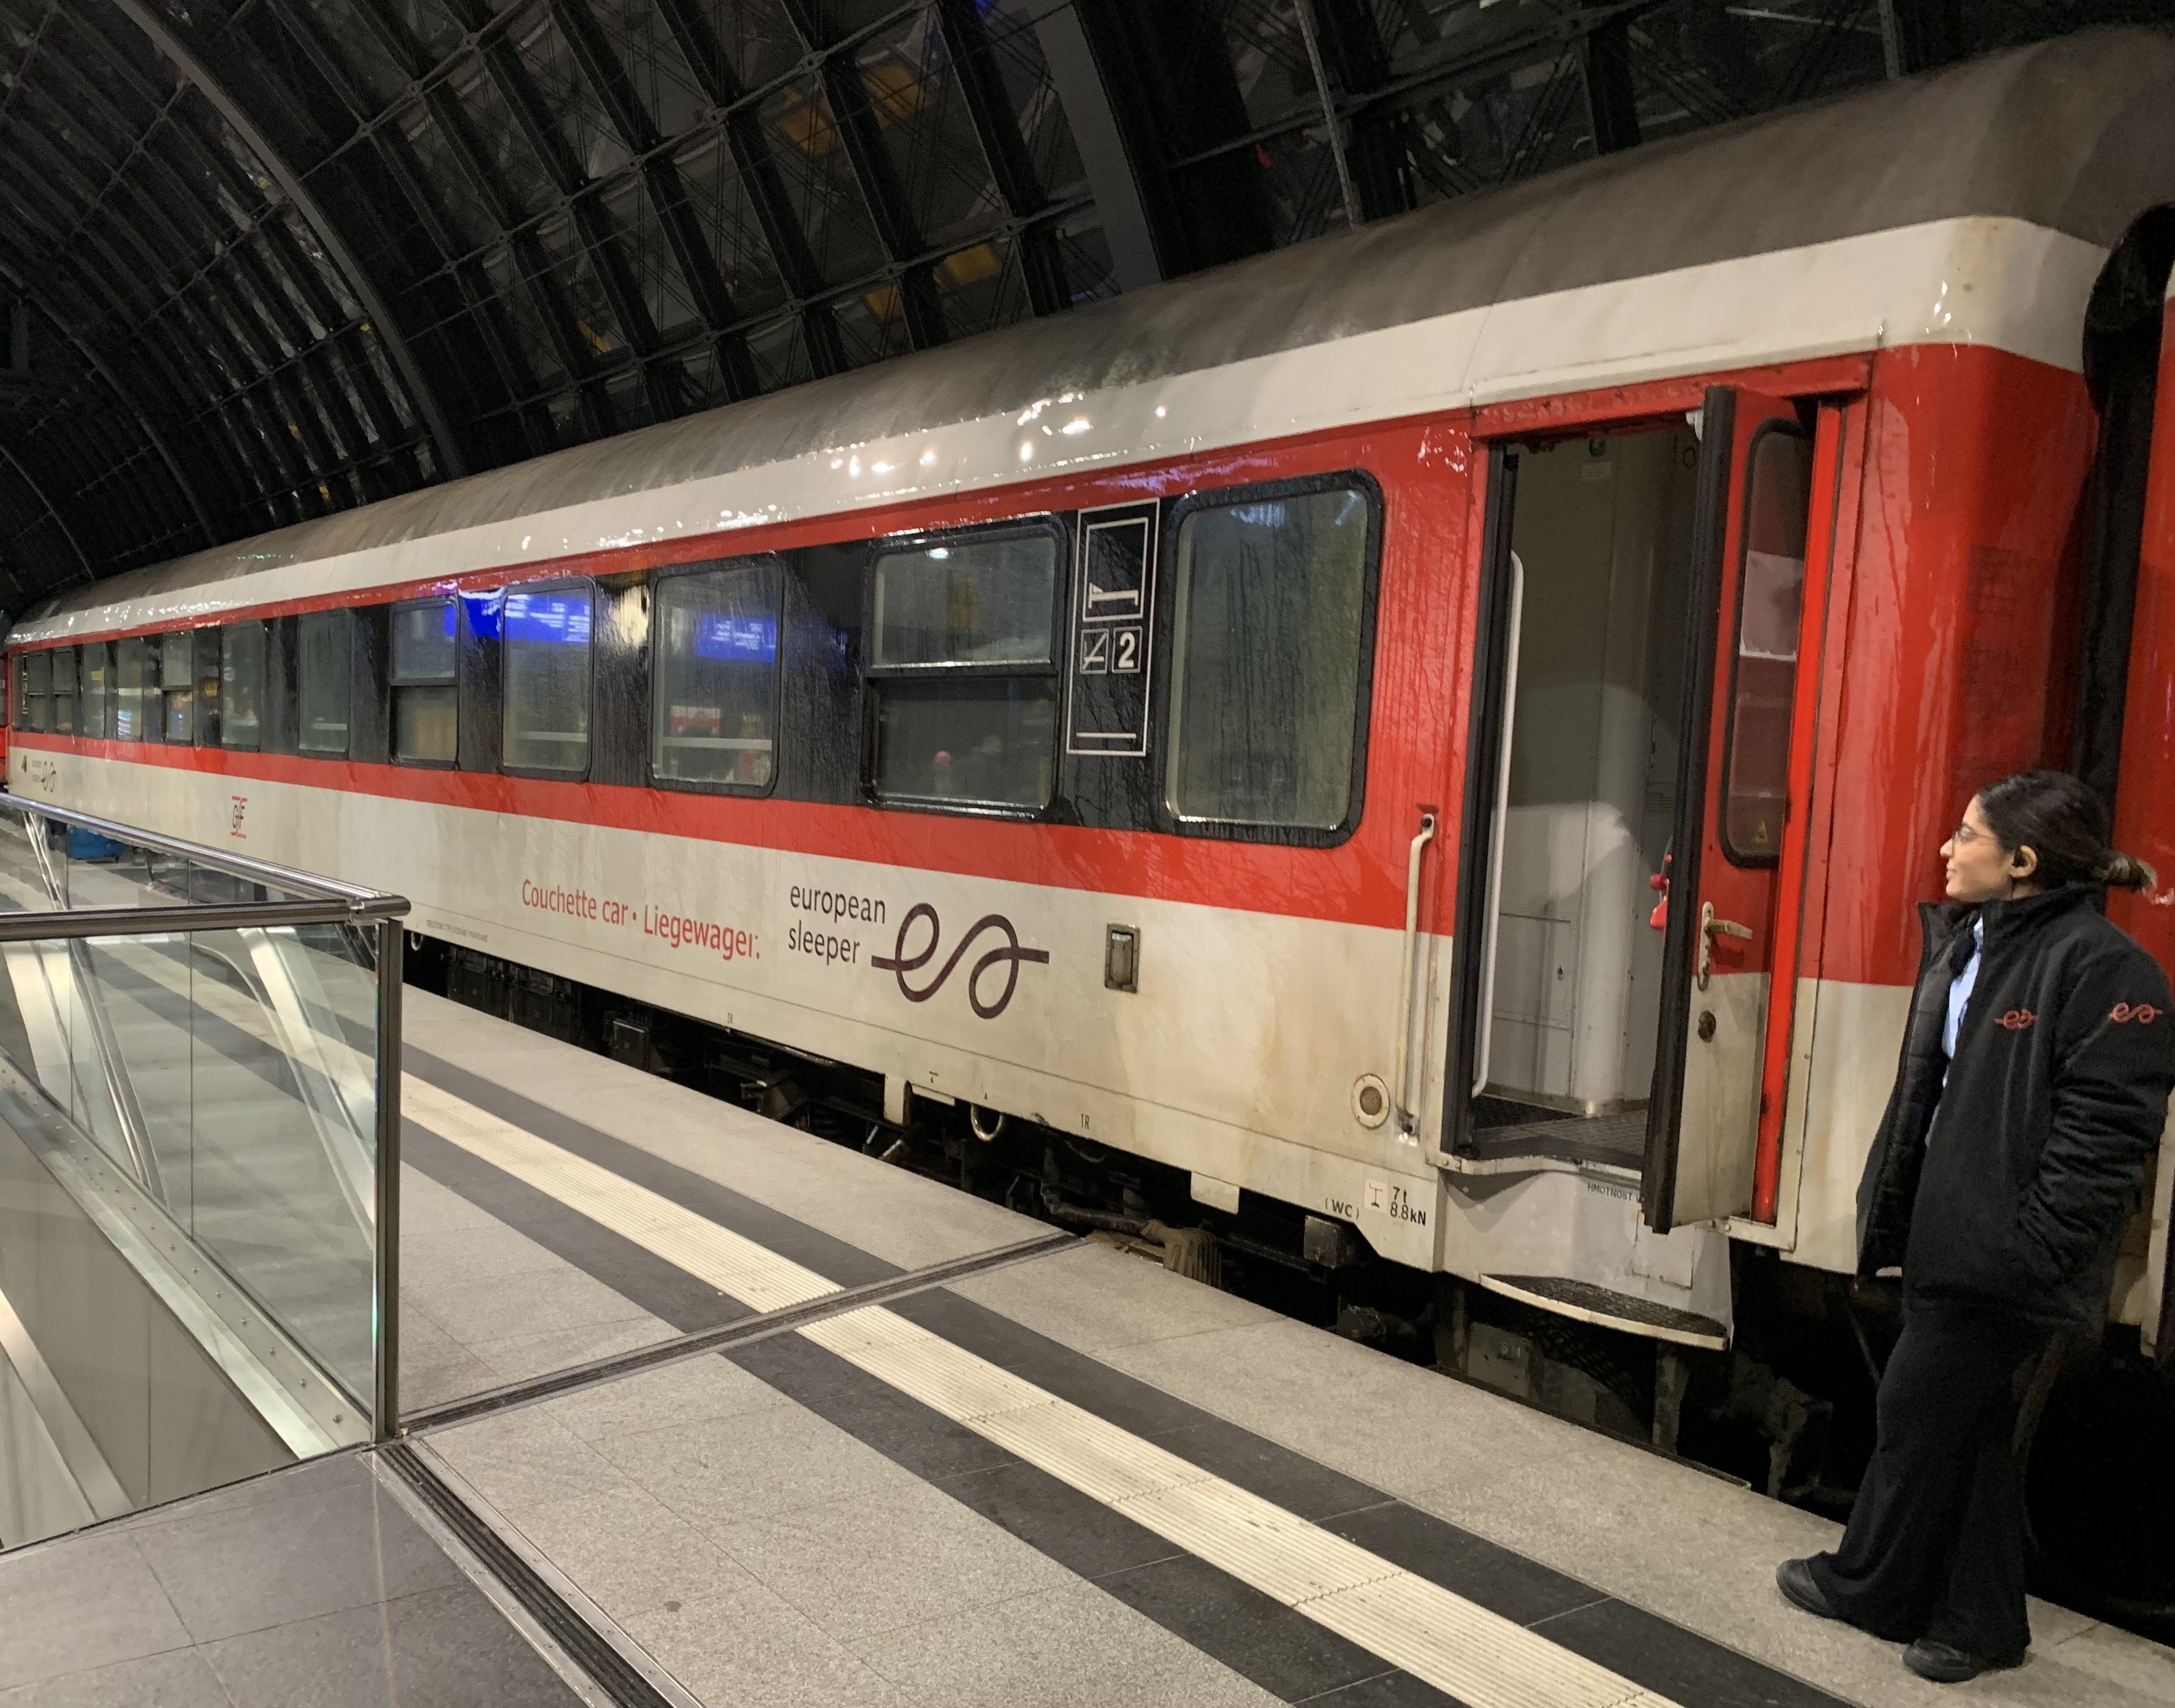 A sleeper downgrade on the first night leg was not the best start to a 14-day journey by rail through Europe, but the magnificent architecture on view, and some business class luxury, more than compensated for such low points. Photo: Stephen McCarty